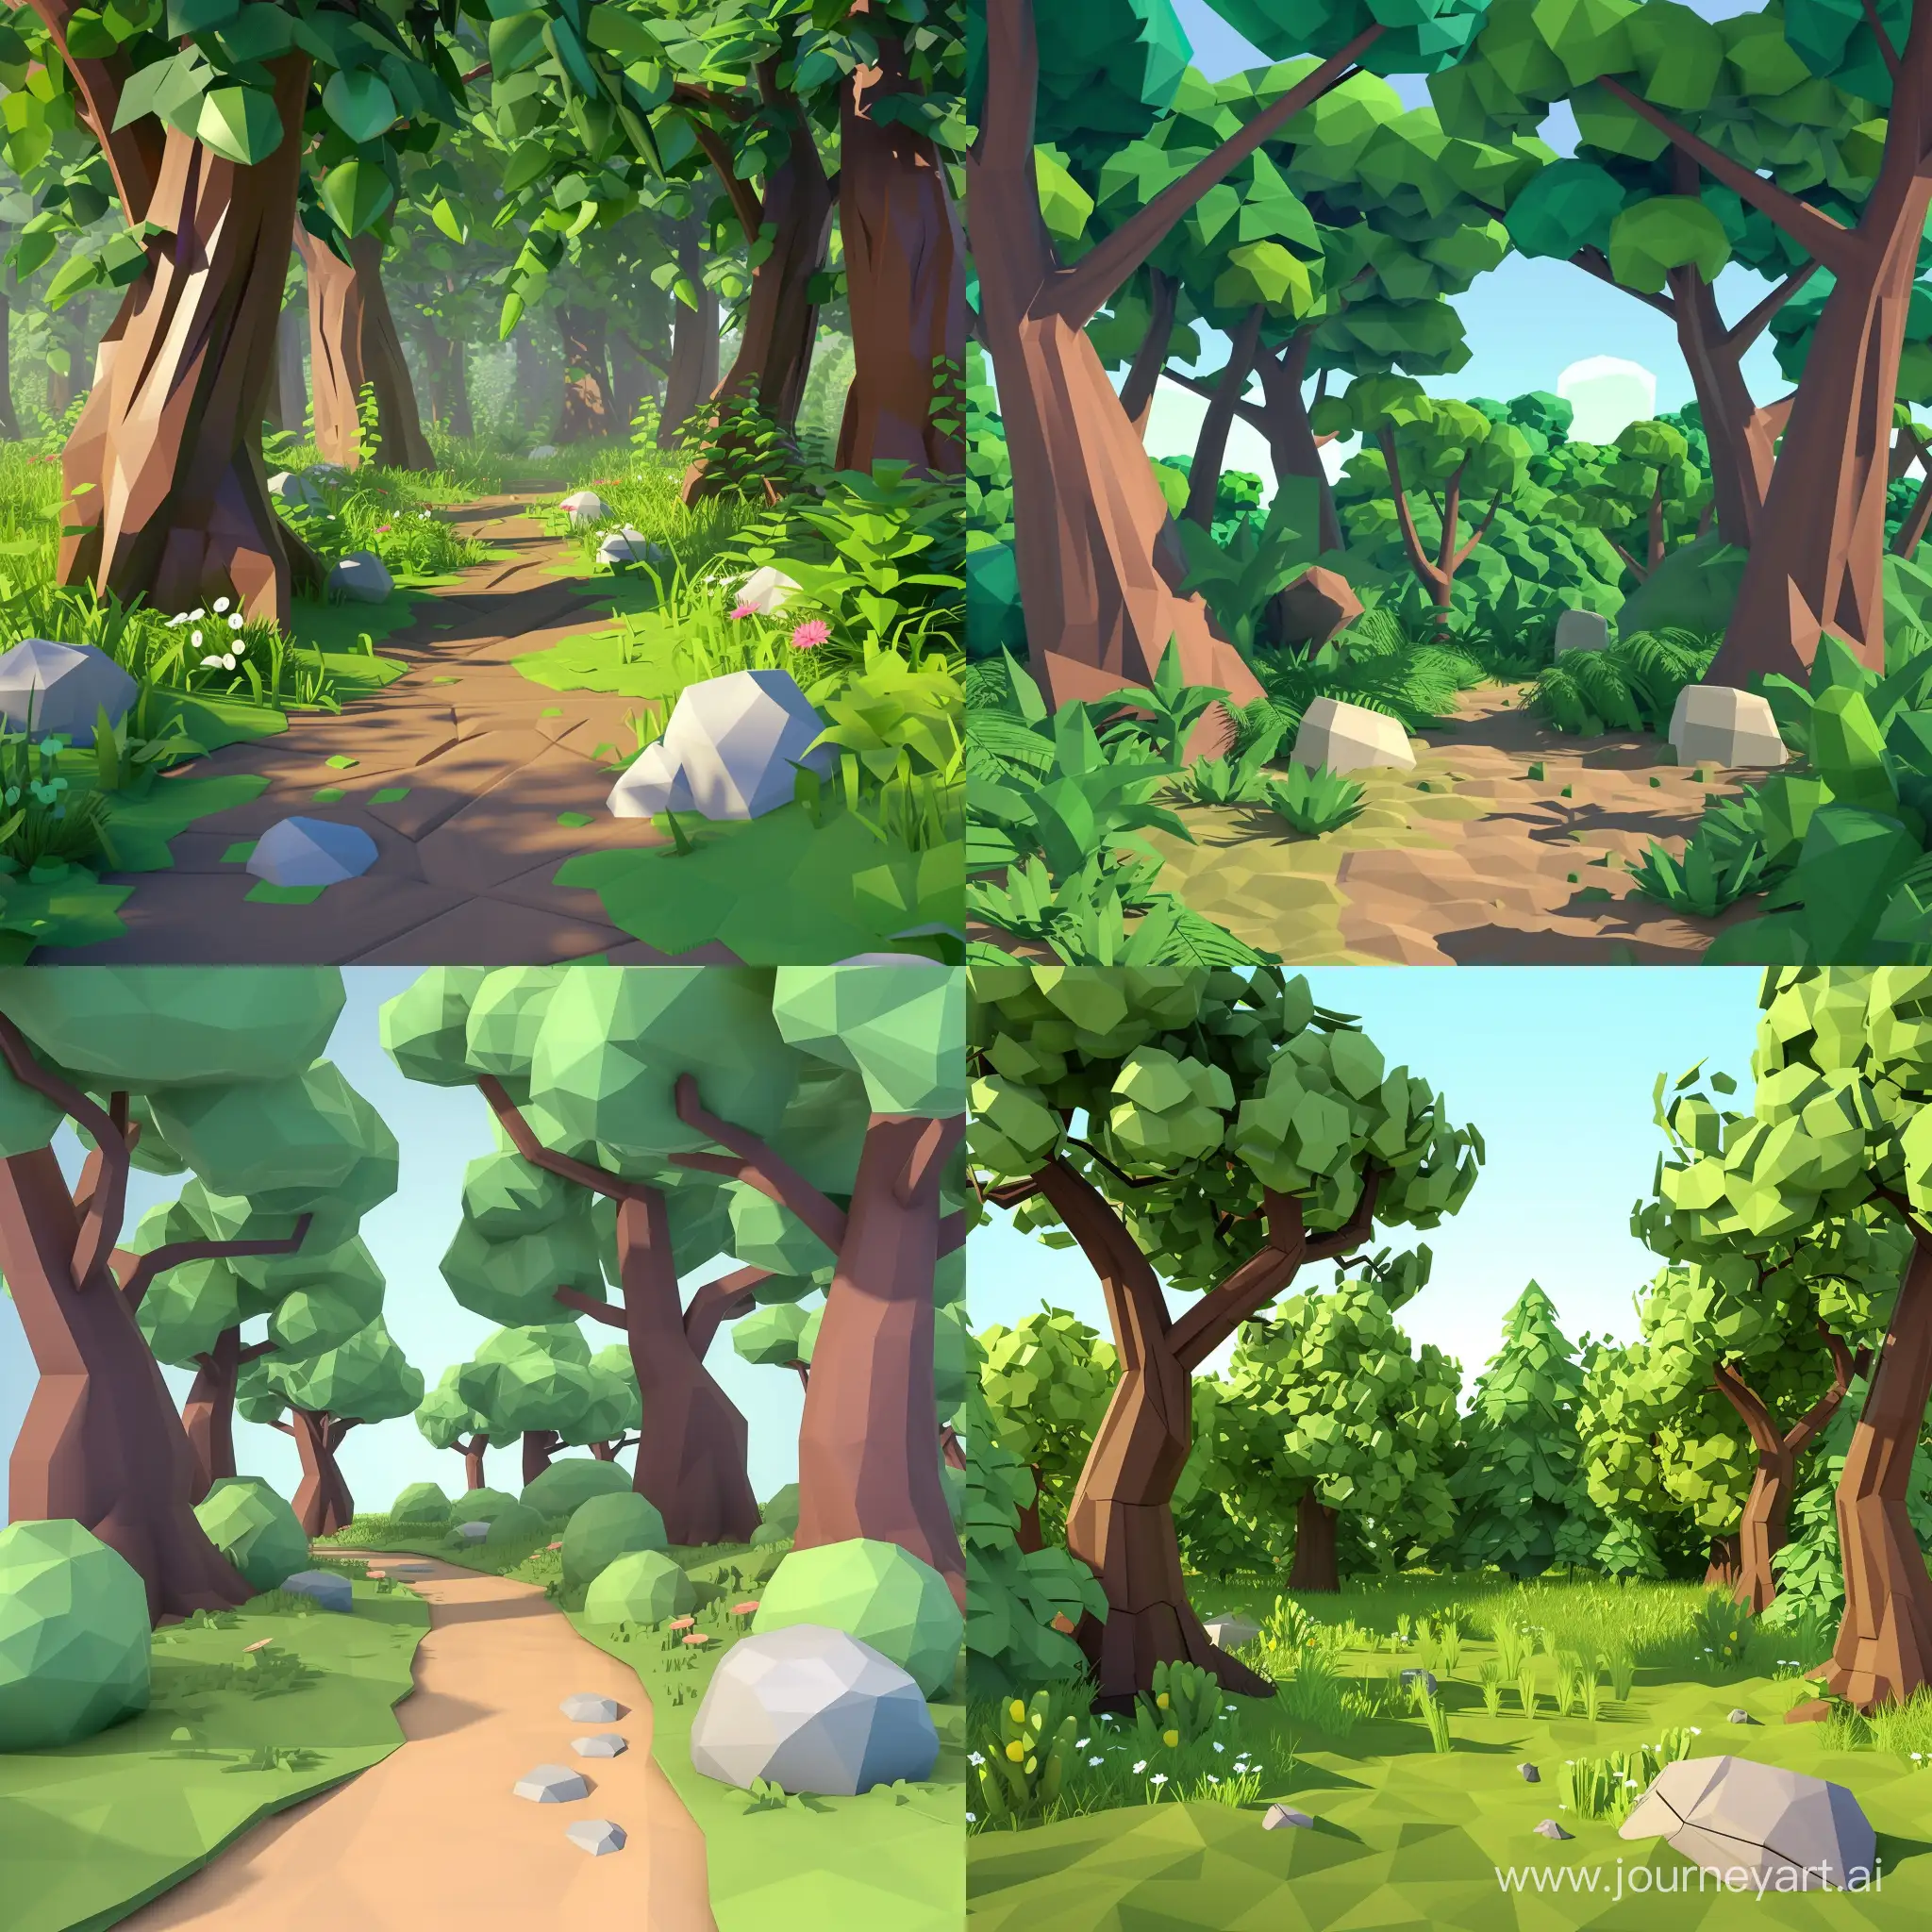 Colorful-Low-Poly-Forest-Scene-Vibrant-Cartoon-Woodscape